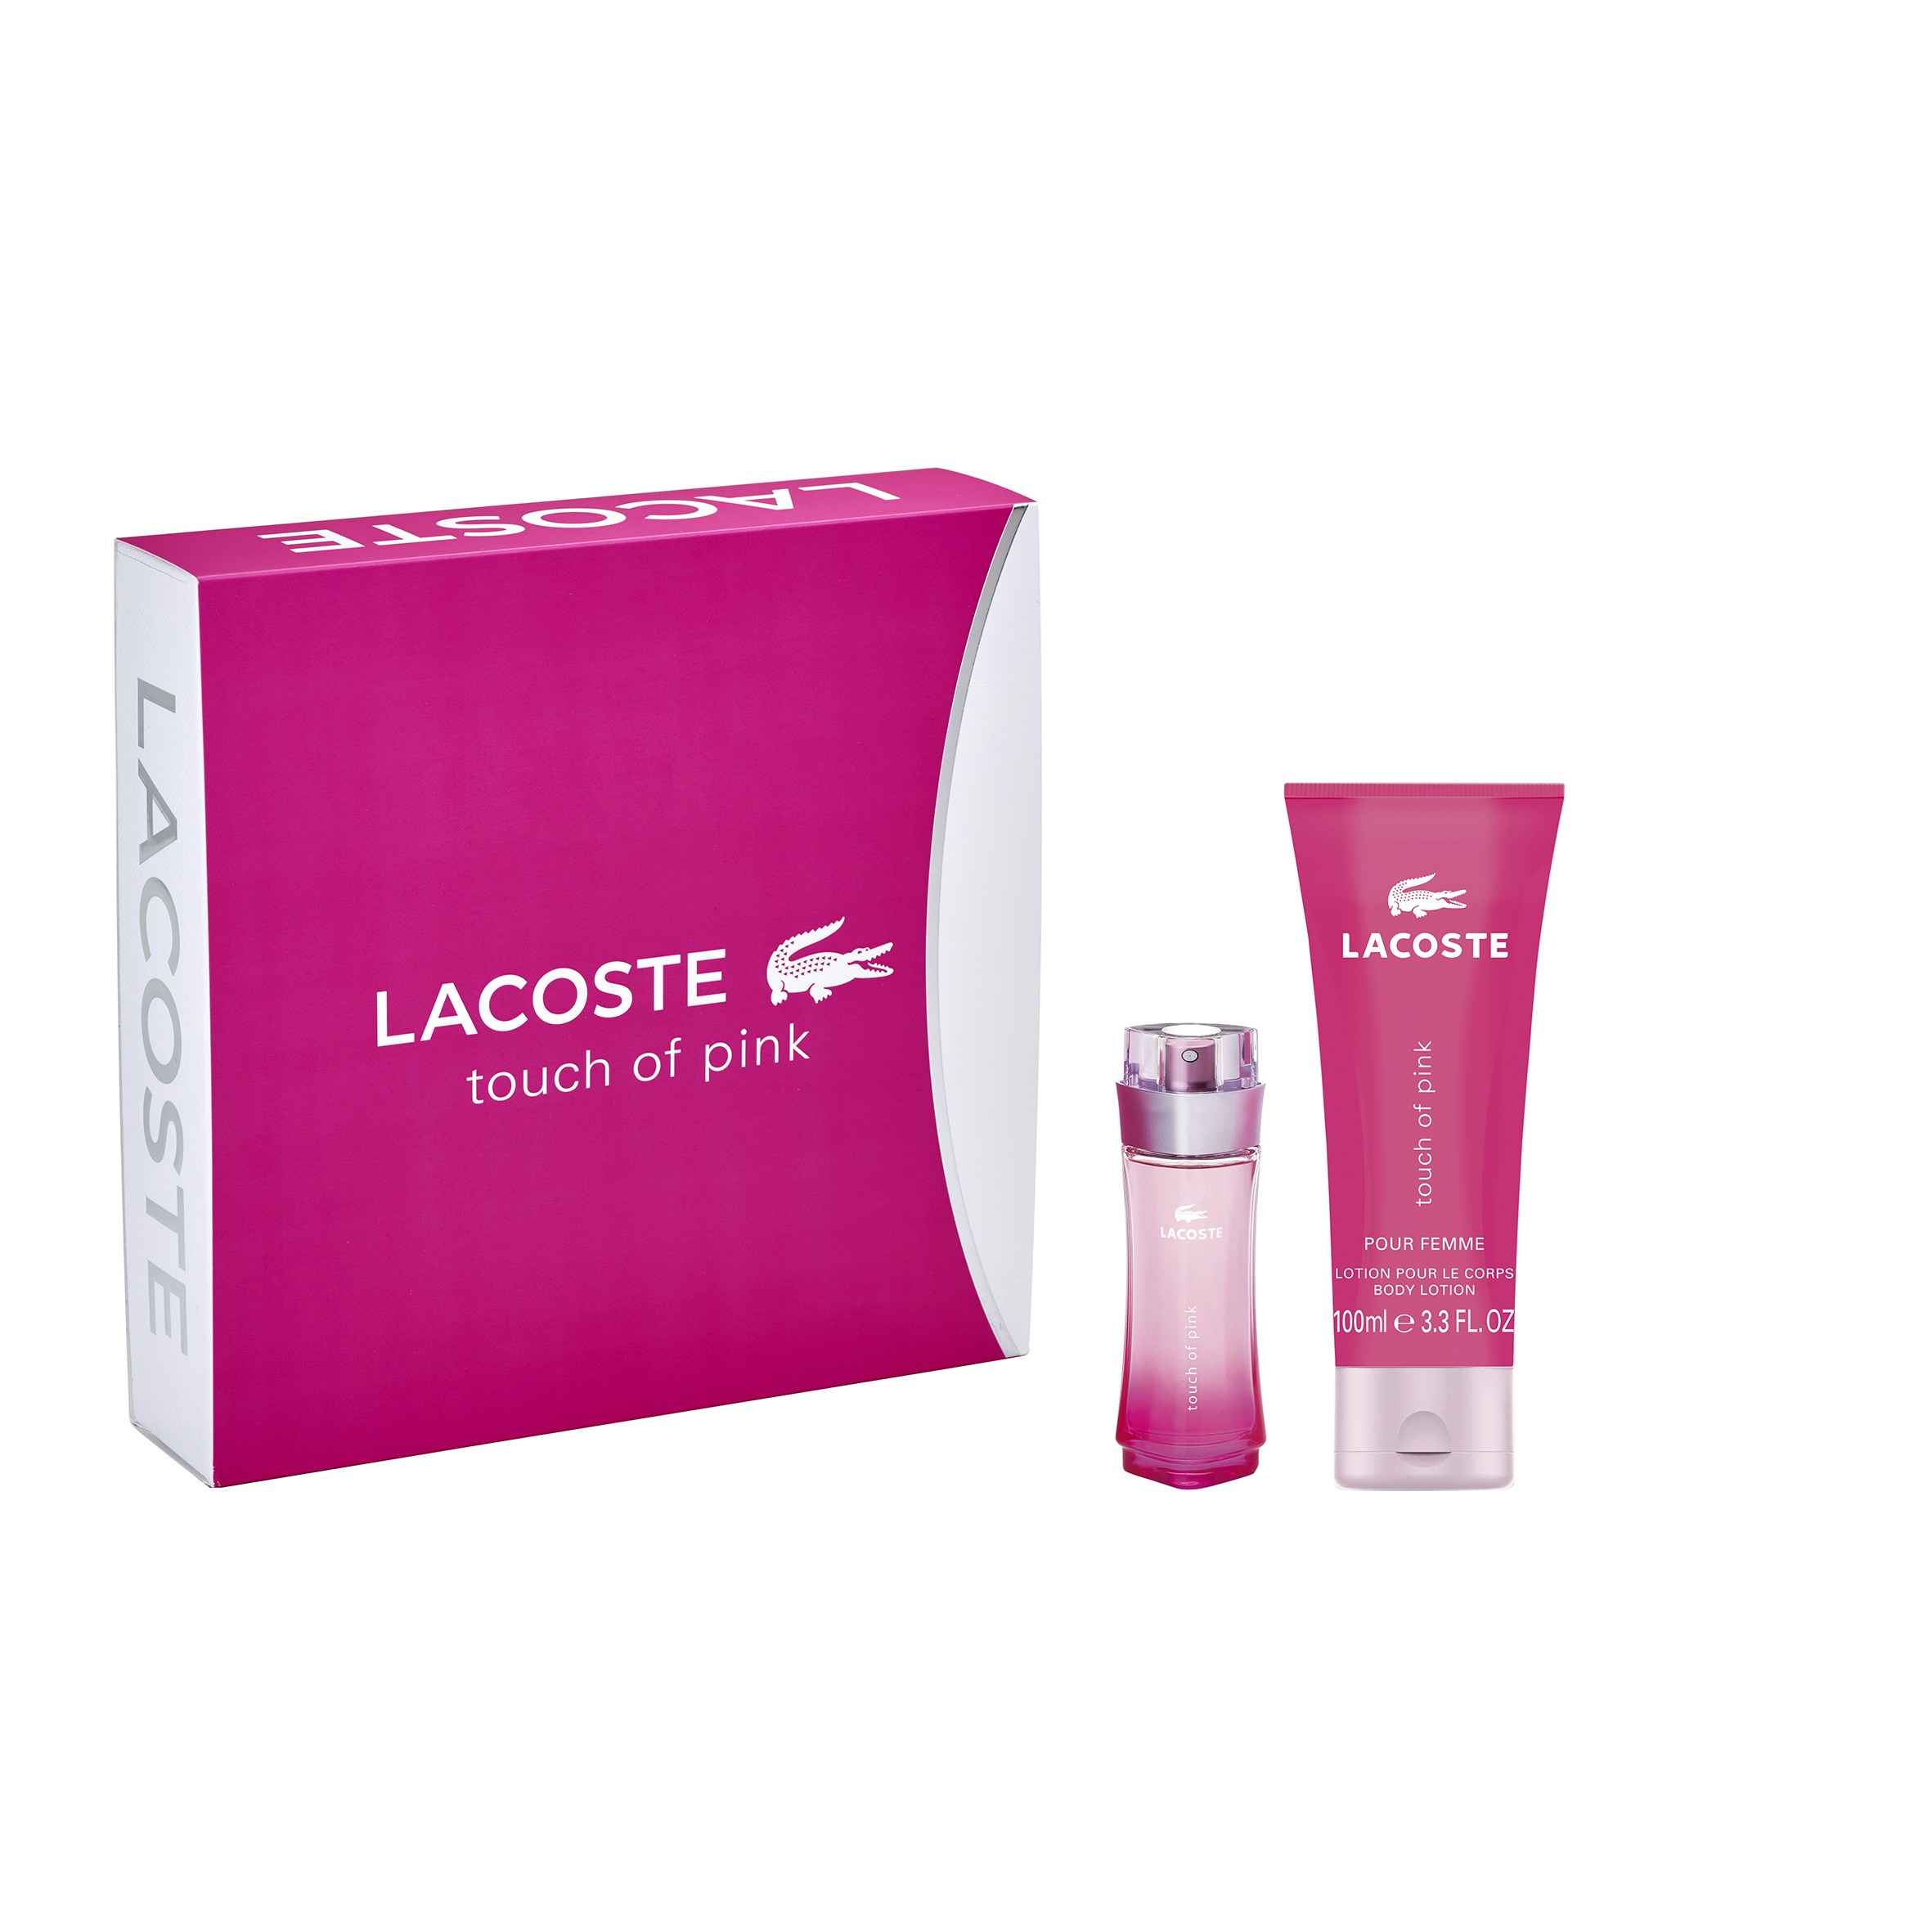 lacoste pink gift set